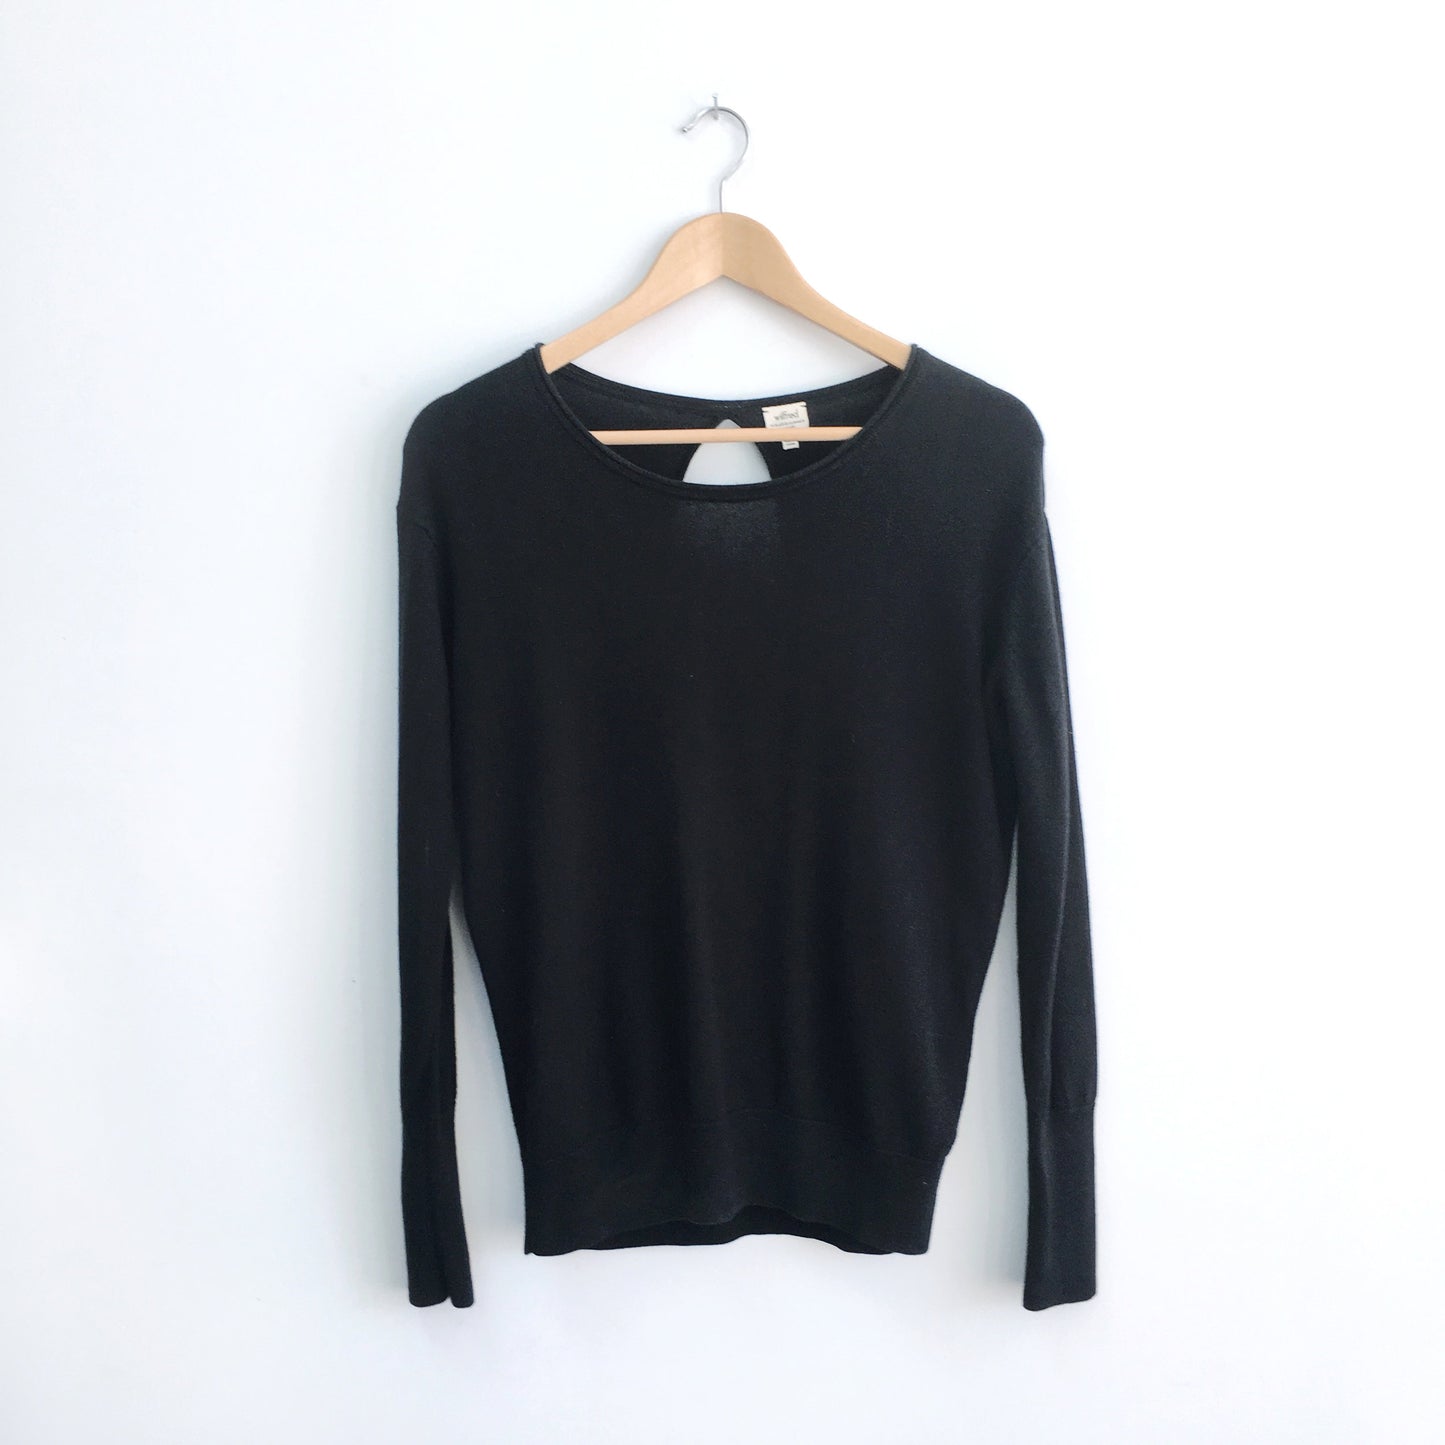 Wilfred Sweater with Keyhole Back - size xs